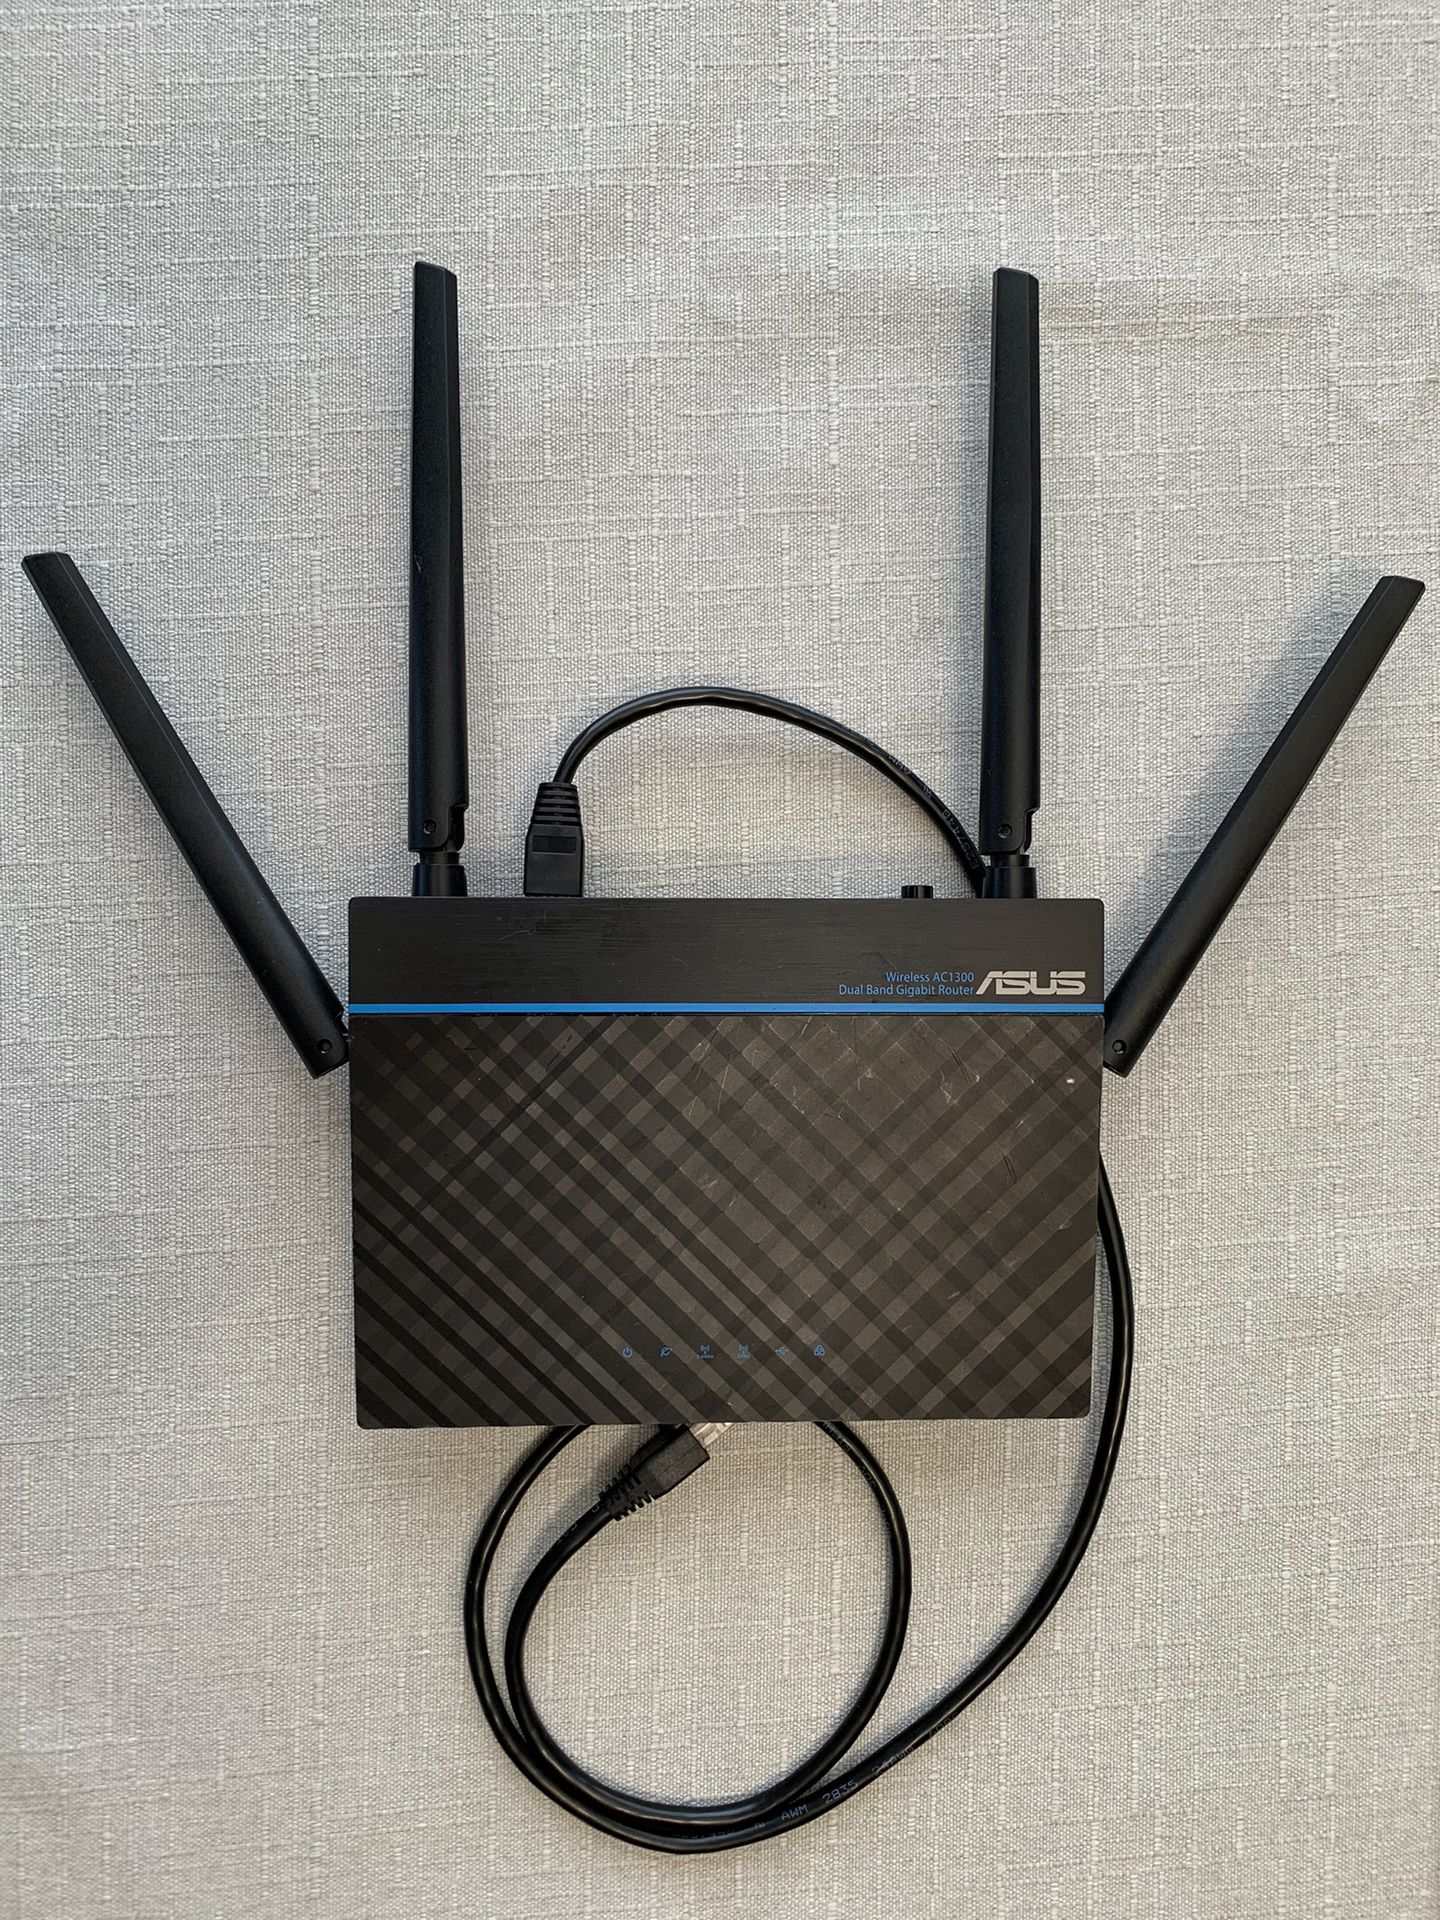 ASUS Wireless AC1300 Dual Band Gigabit Router